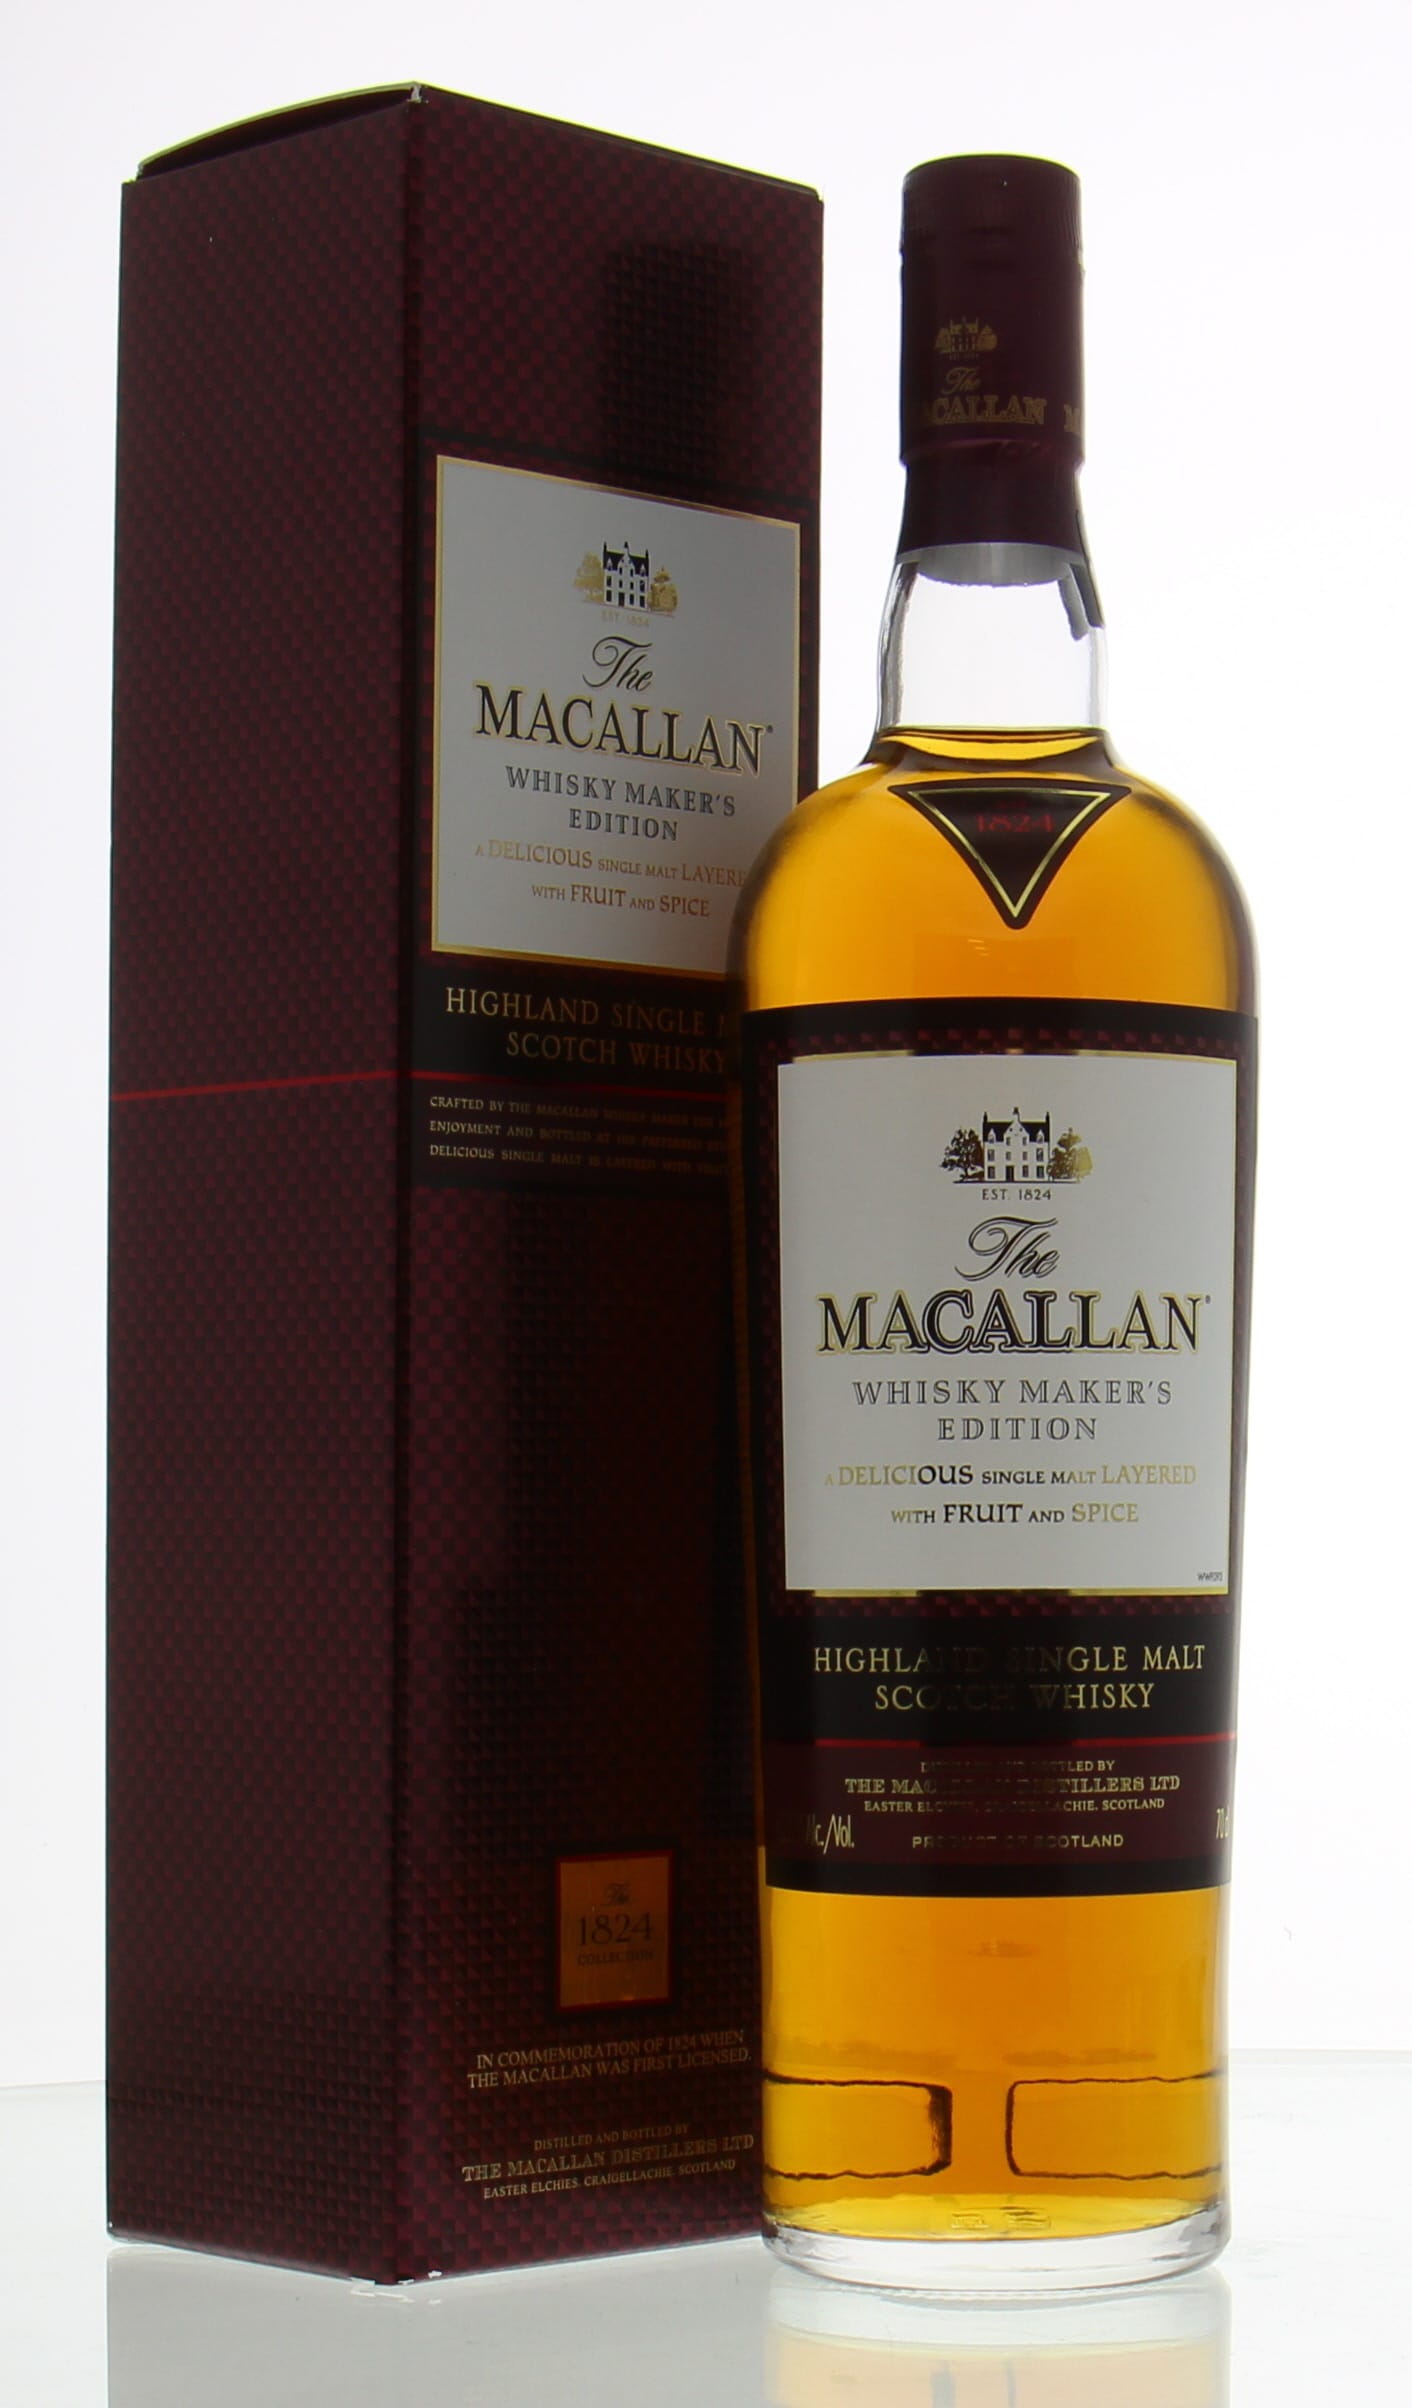 Macallan - Whisky Maker's Edition The 1824 Collection 42.8% NV In Original Container